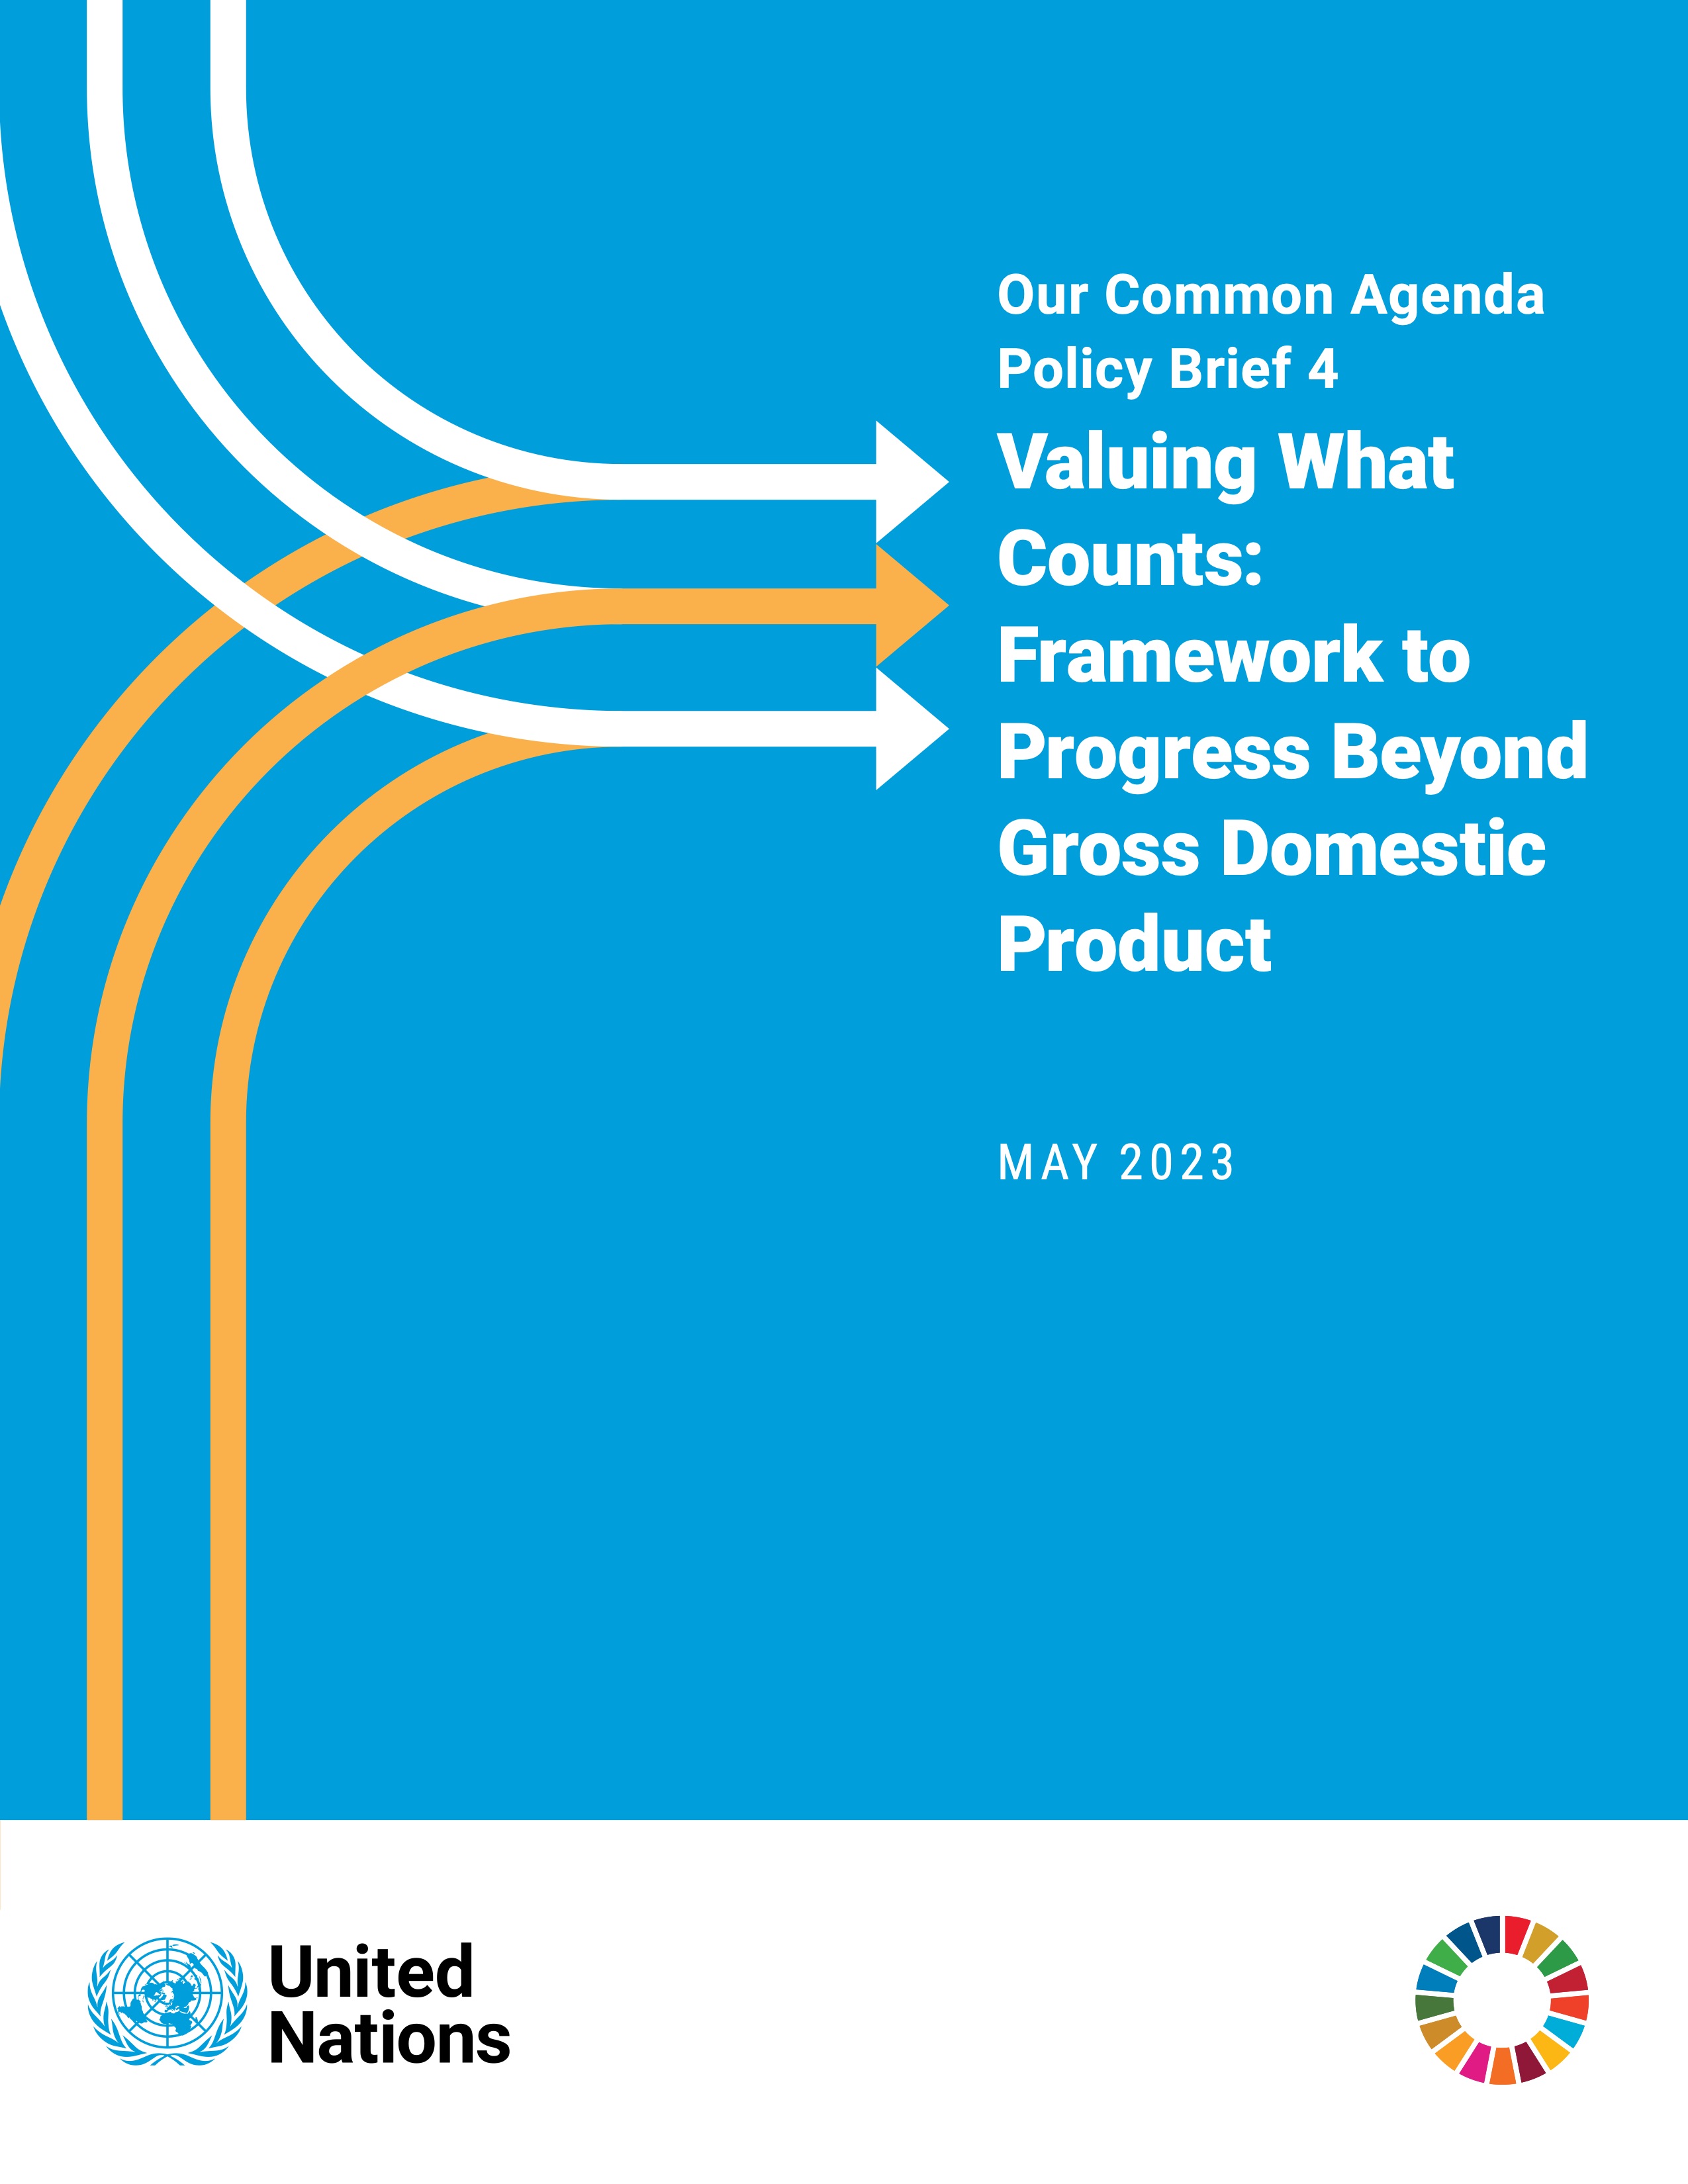 Valuing What Counts: Framework to Progress Beyond Gross Domestic Product